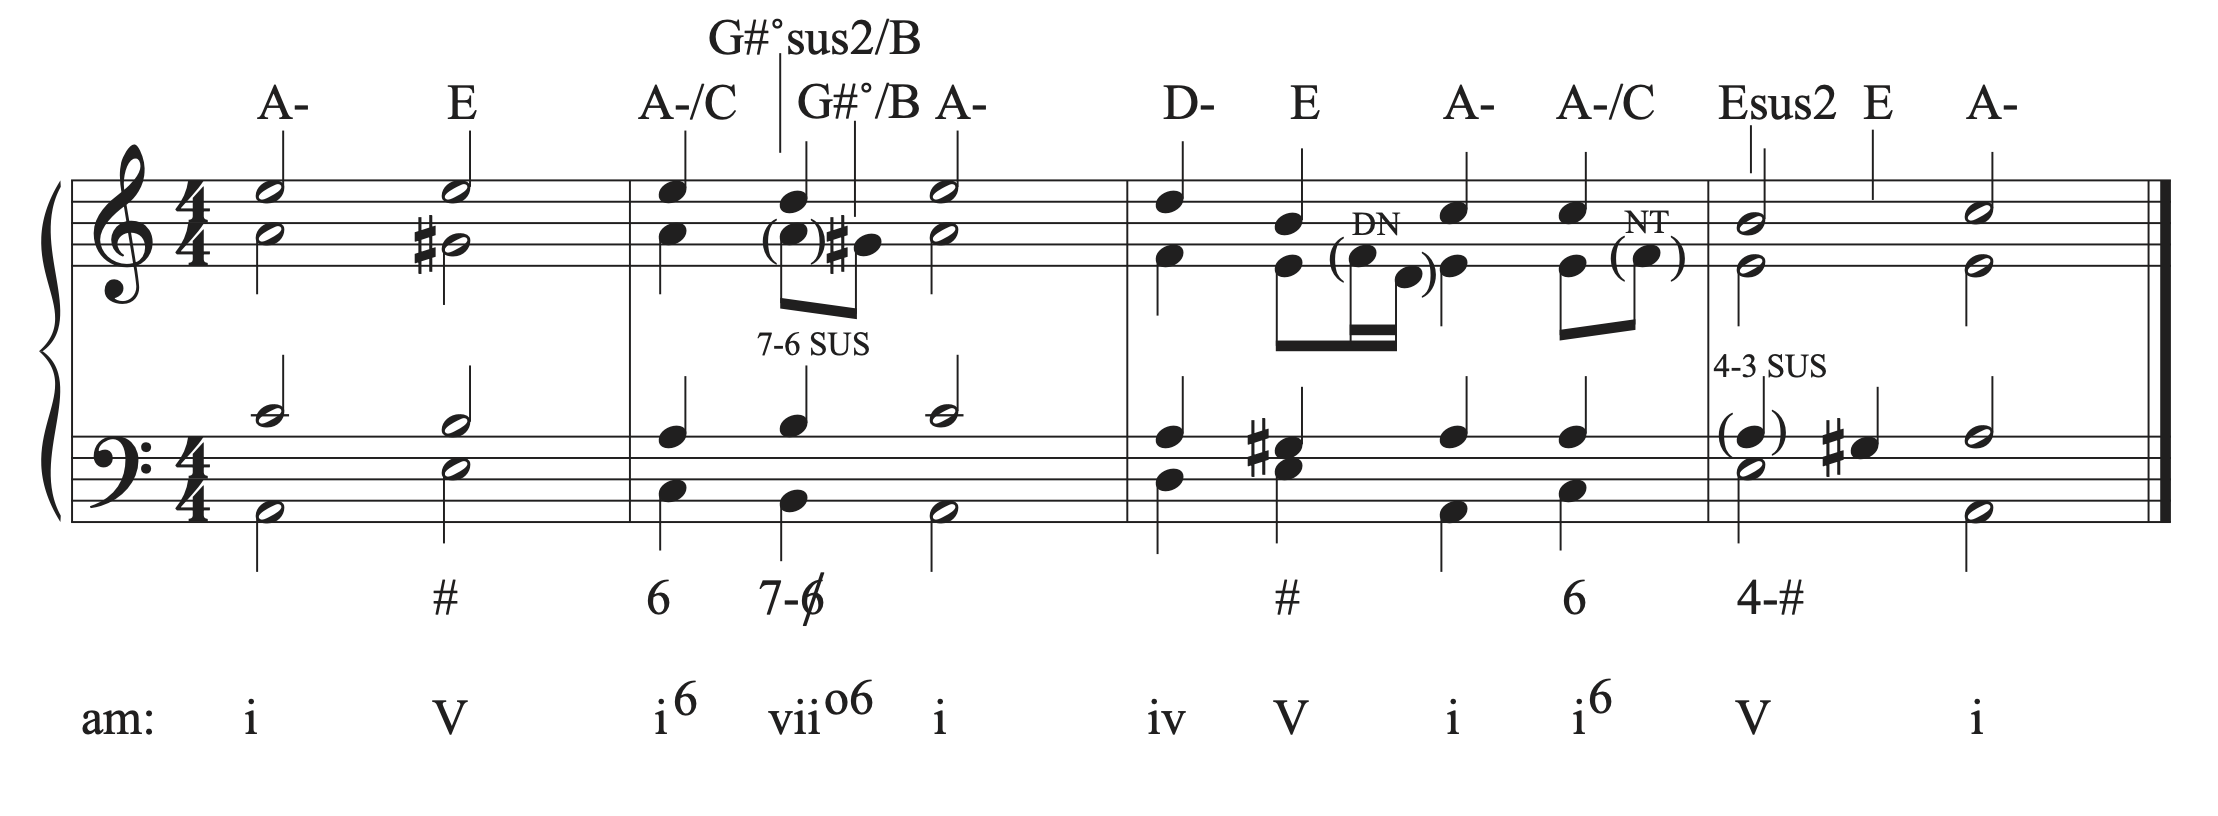 The musical example in A minor with a double neighbor and neighbor tone added.